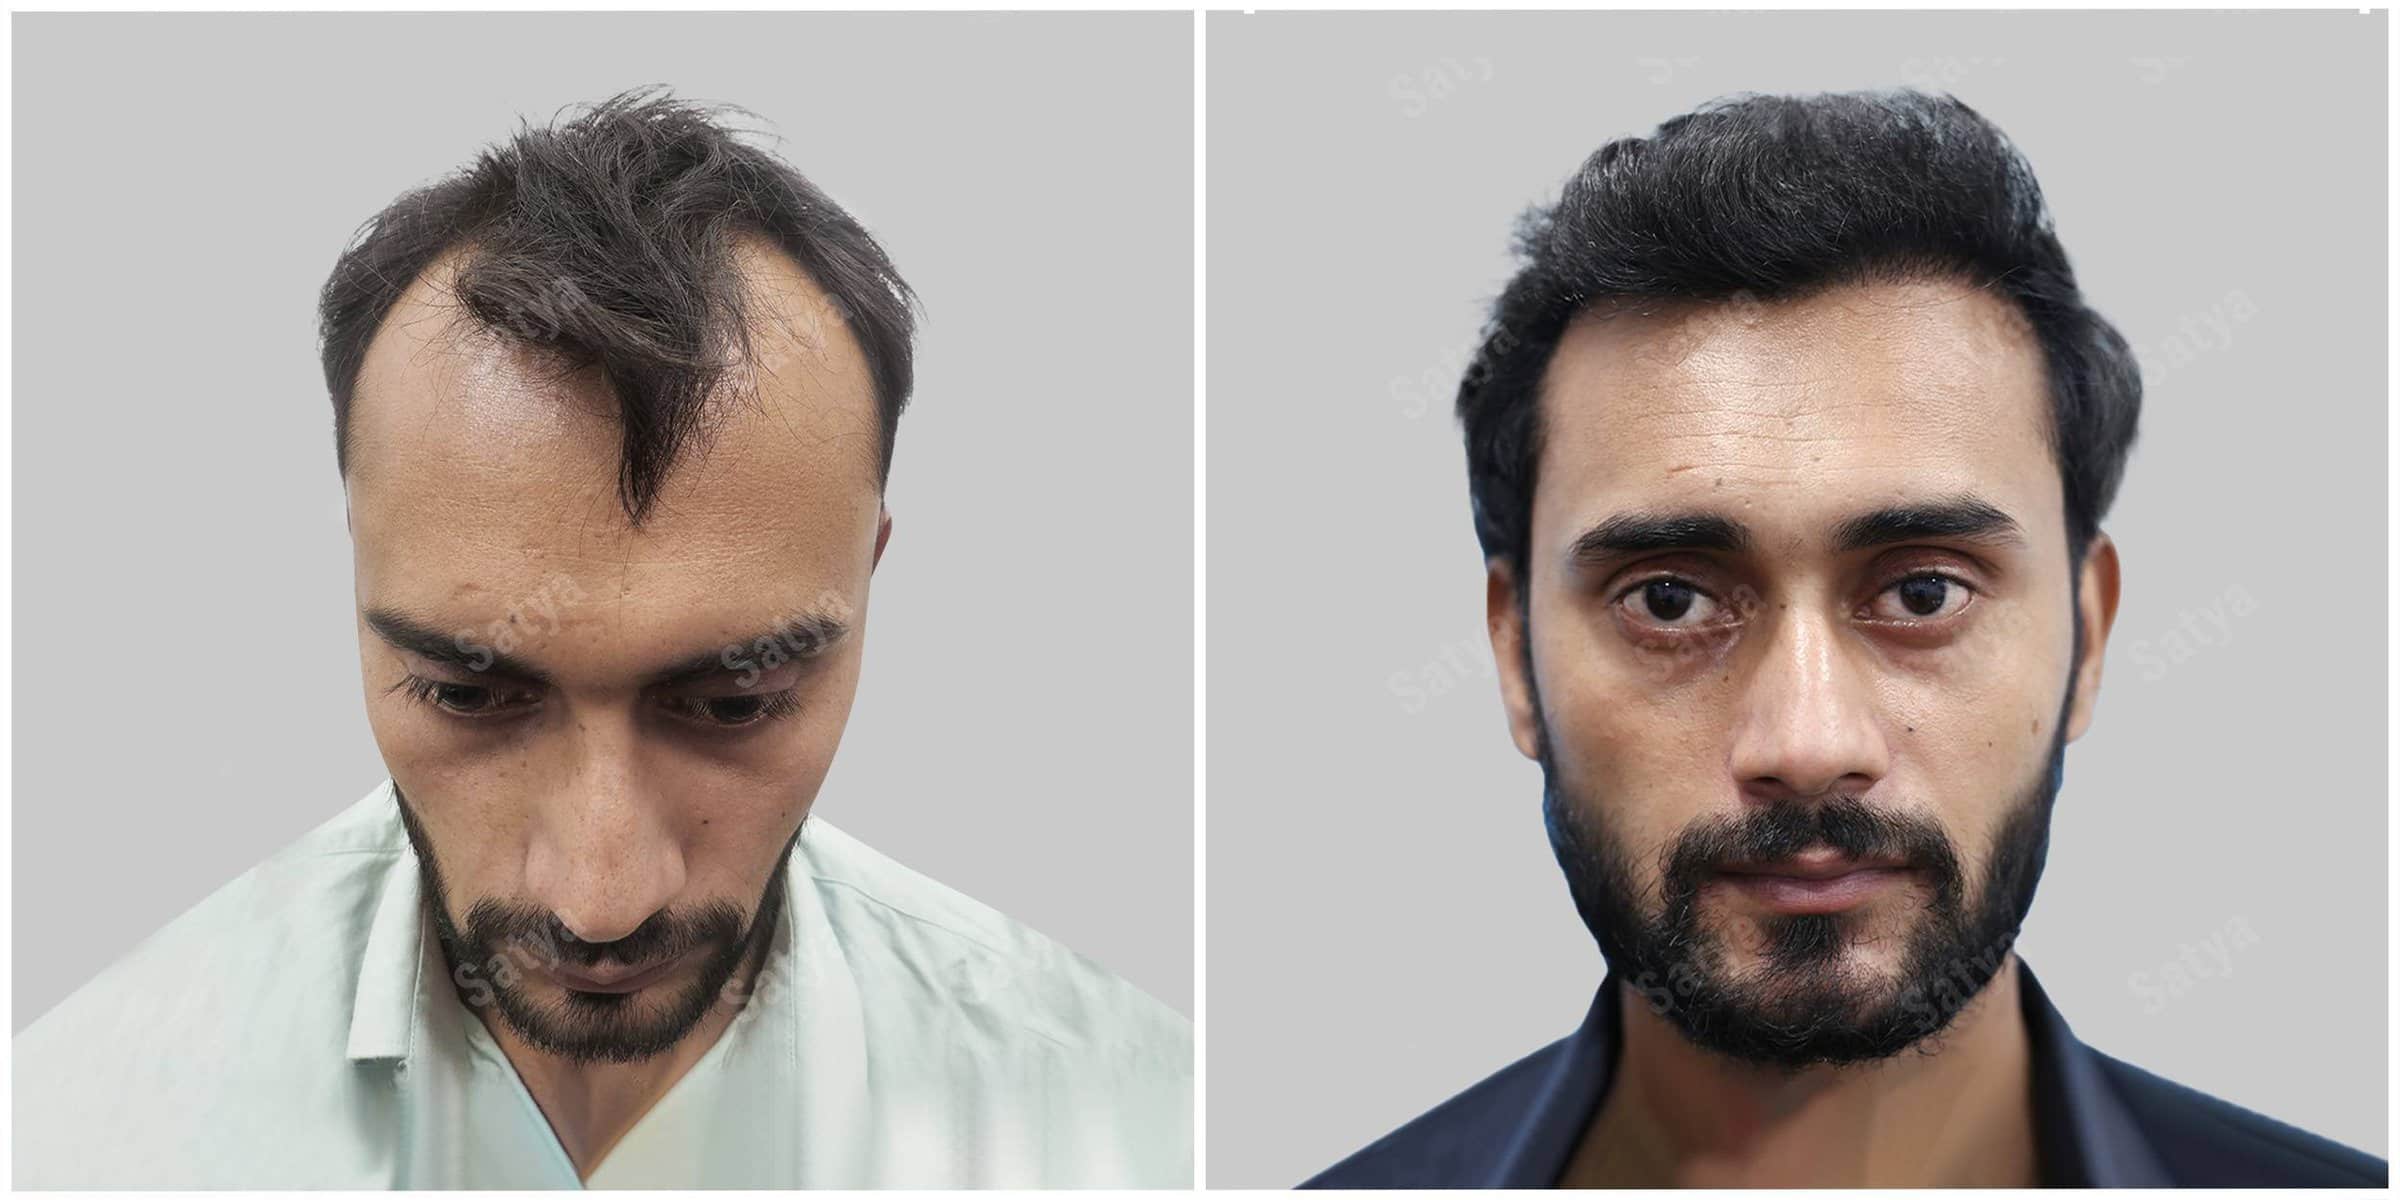 hair transplant results before and after